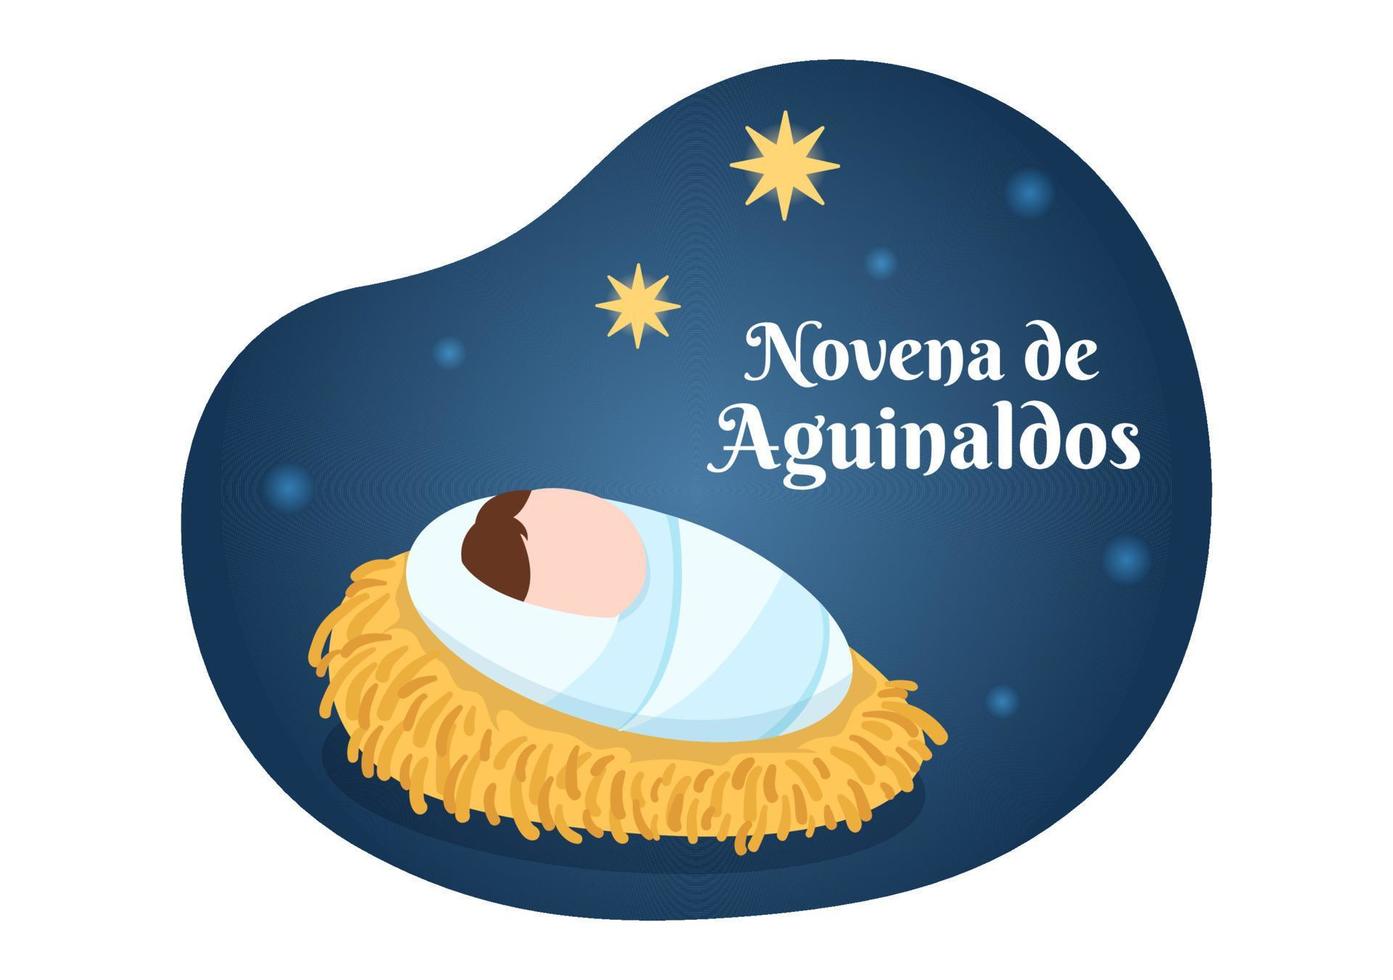 Novena De Aguinaldos Holiday Tradition in Colombia for Families to Get Together at Christmas in Flat Cartoon Hand Drawn Templates Illustration vector